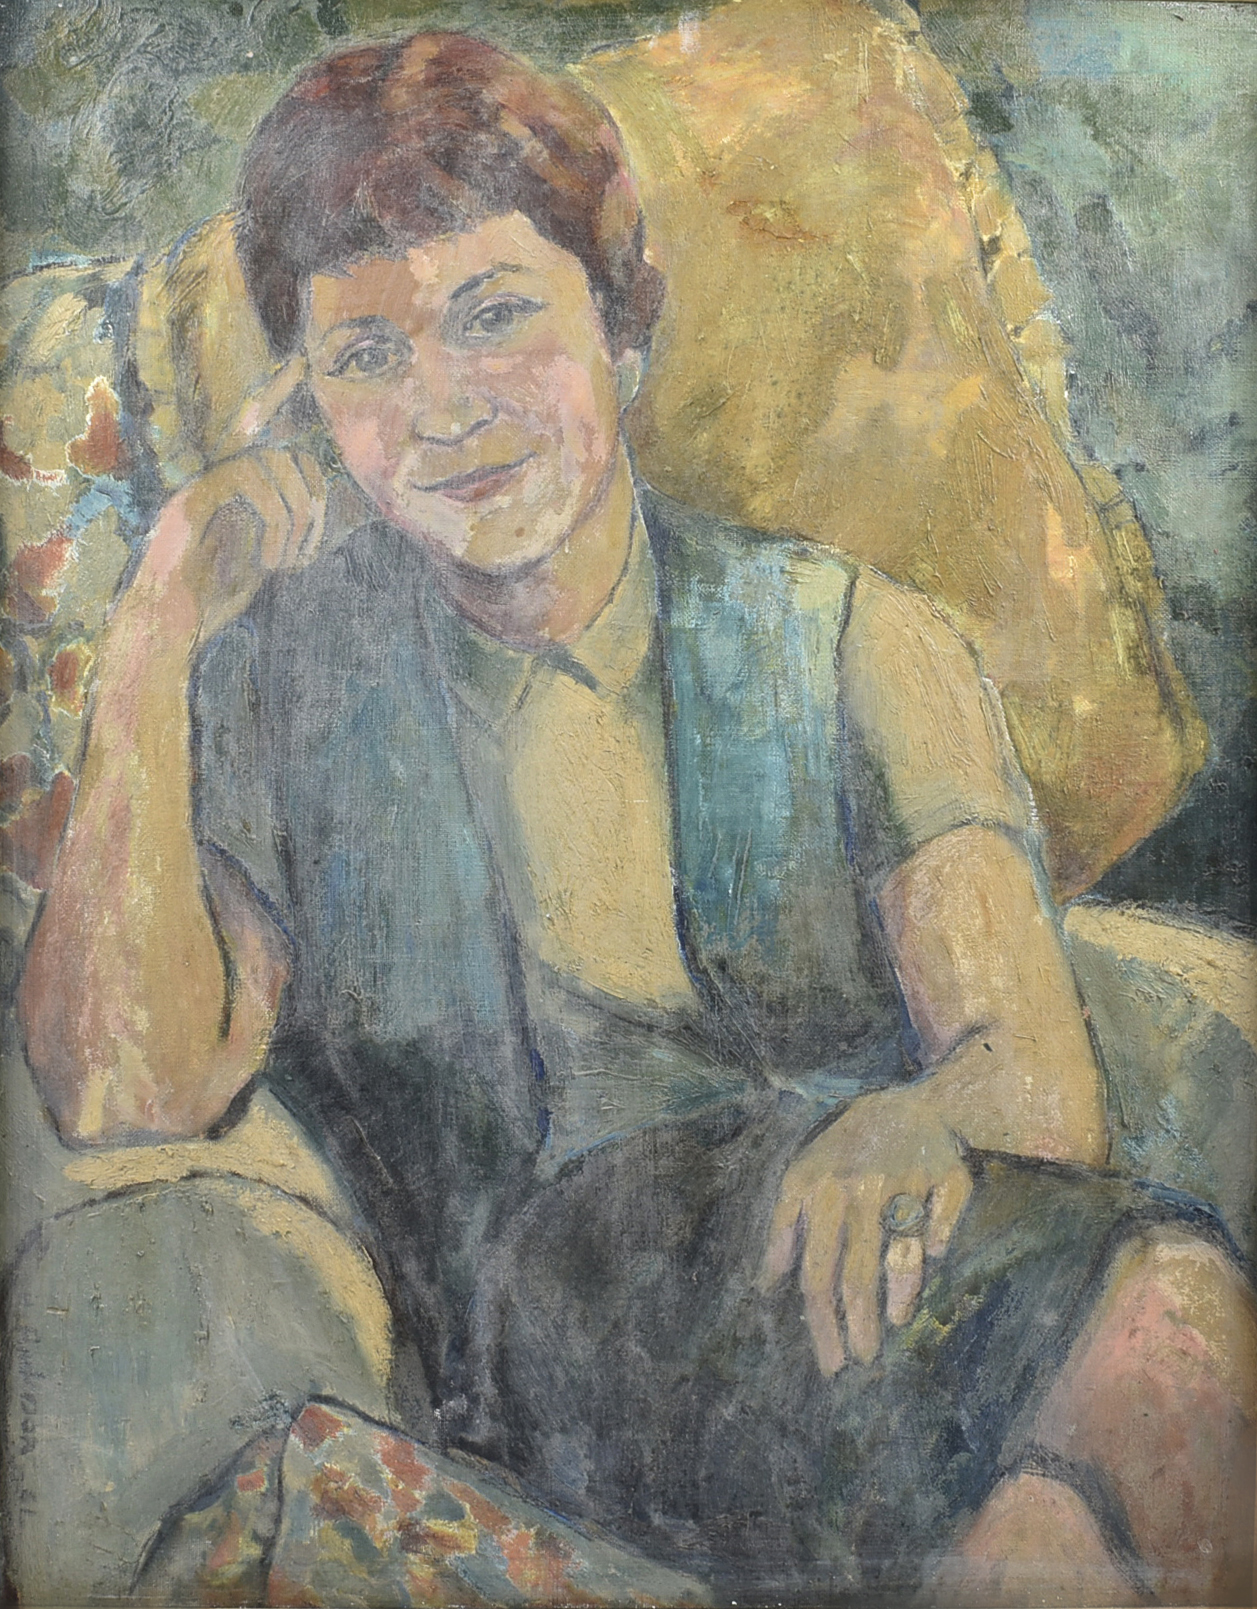 Mid 20th Century British School oil on board, 'Portrait of a Lady in an Armchair', signed and